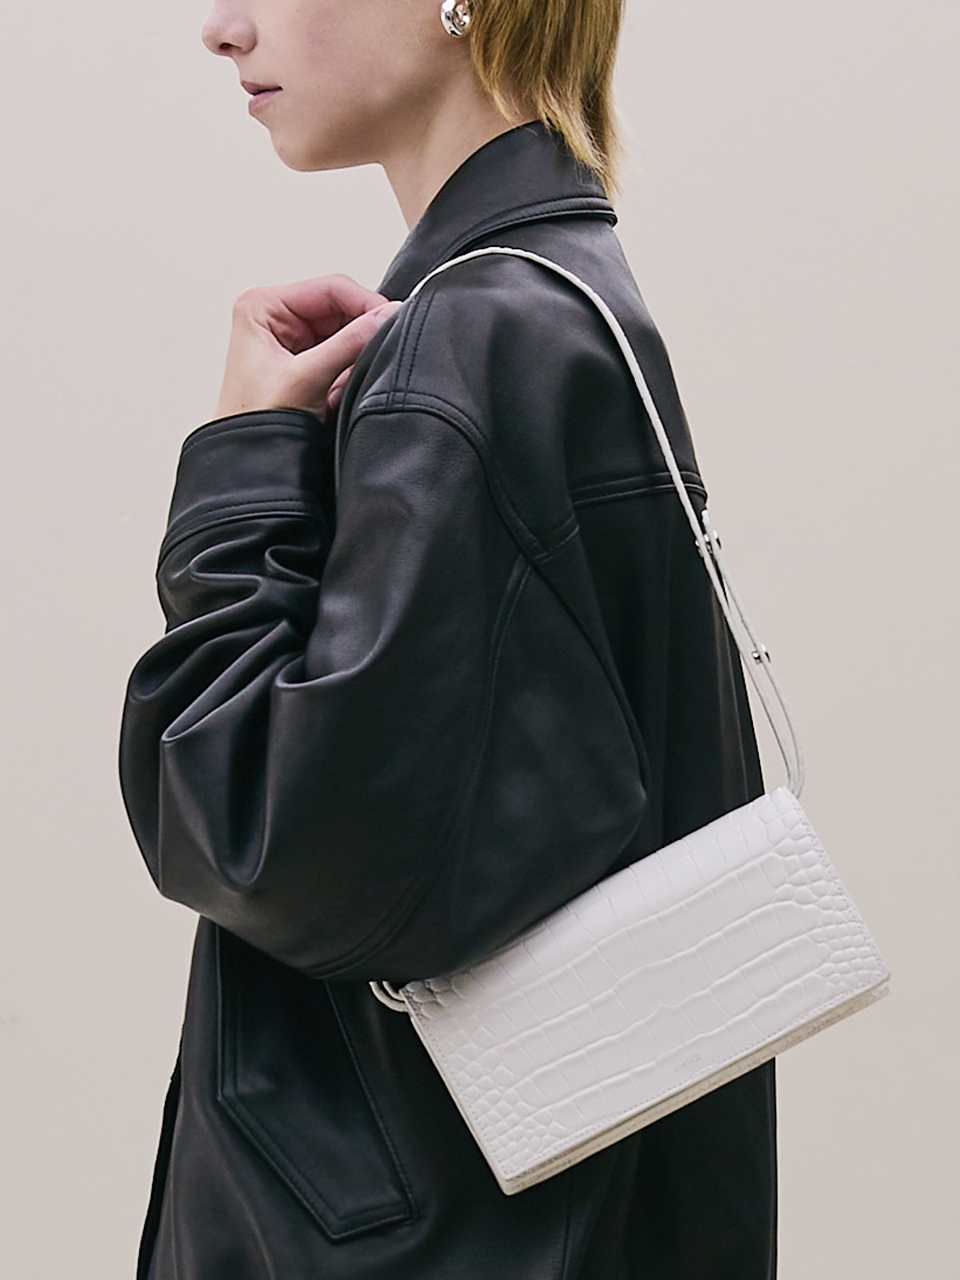 CLN - Make it sleek and chic. 🖤 Shop them here: Asher Tote: cln